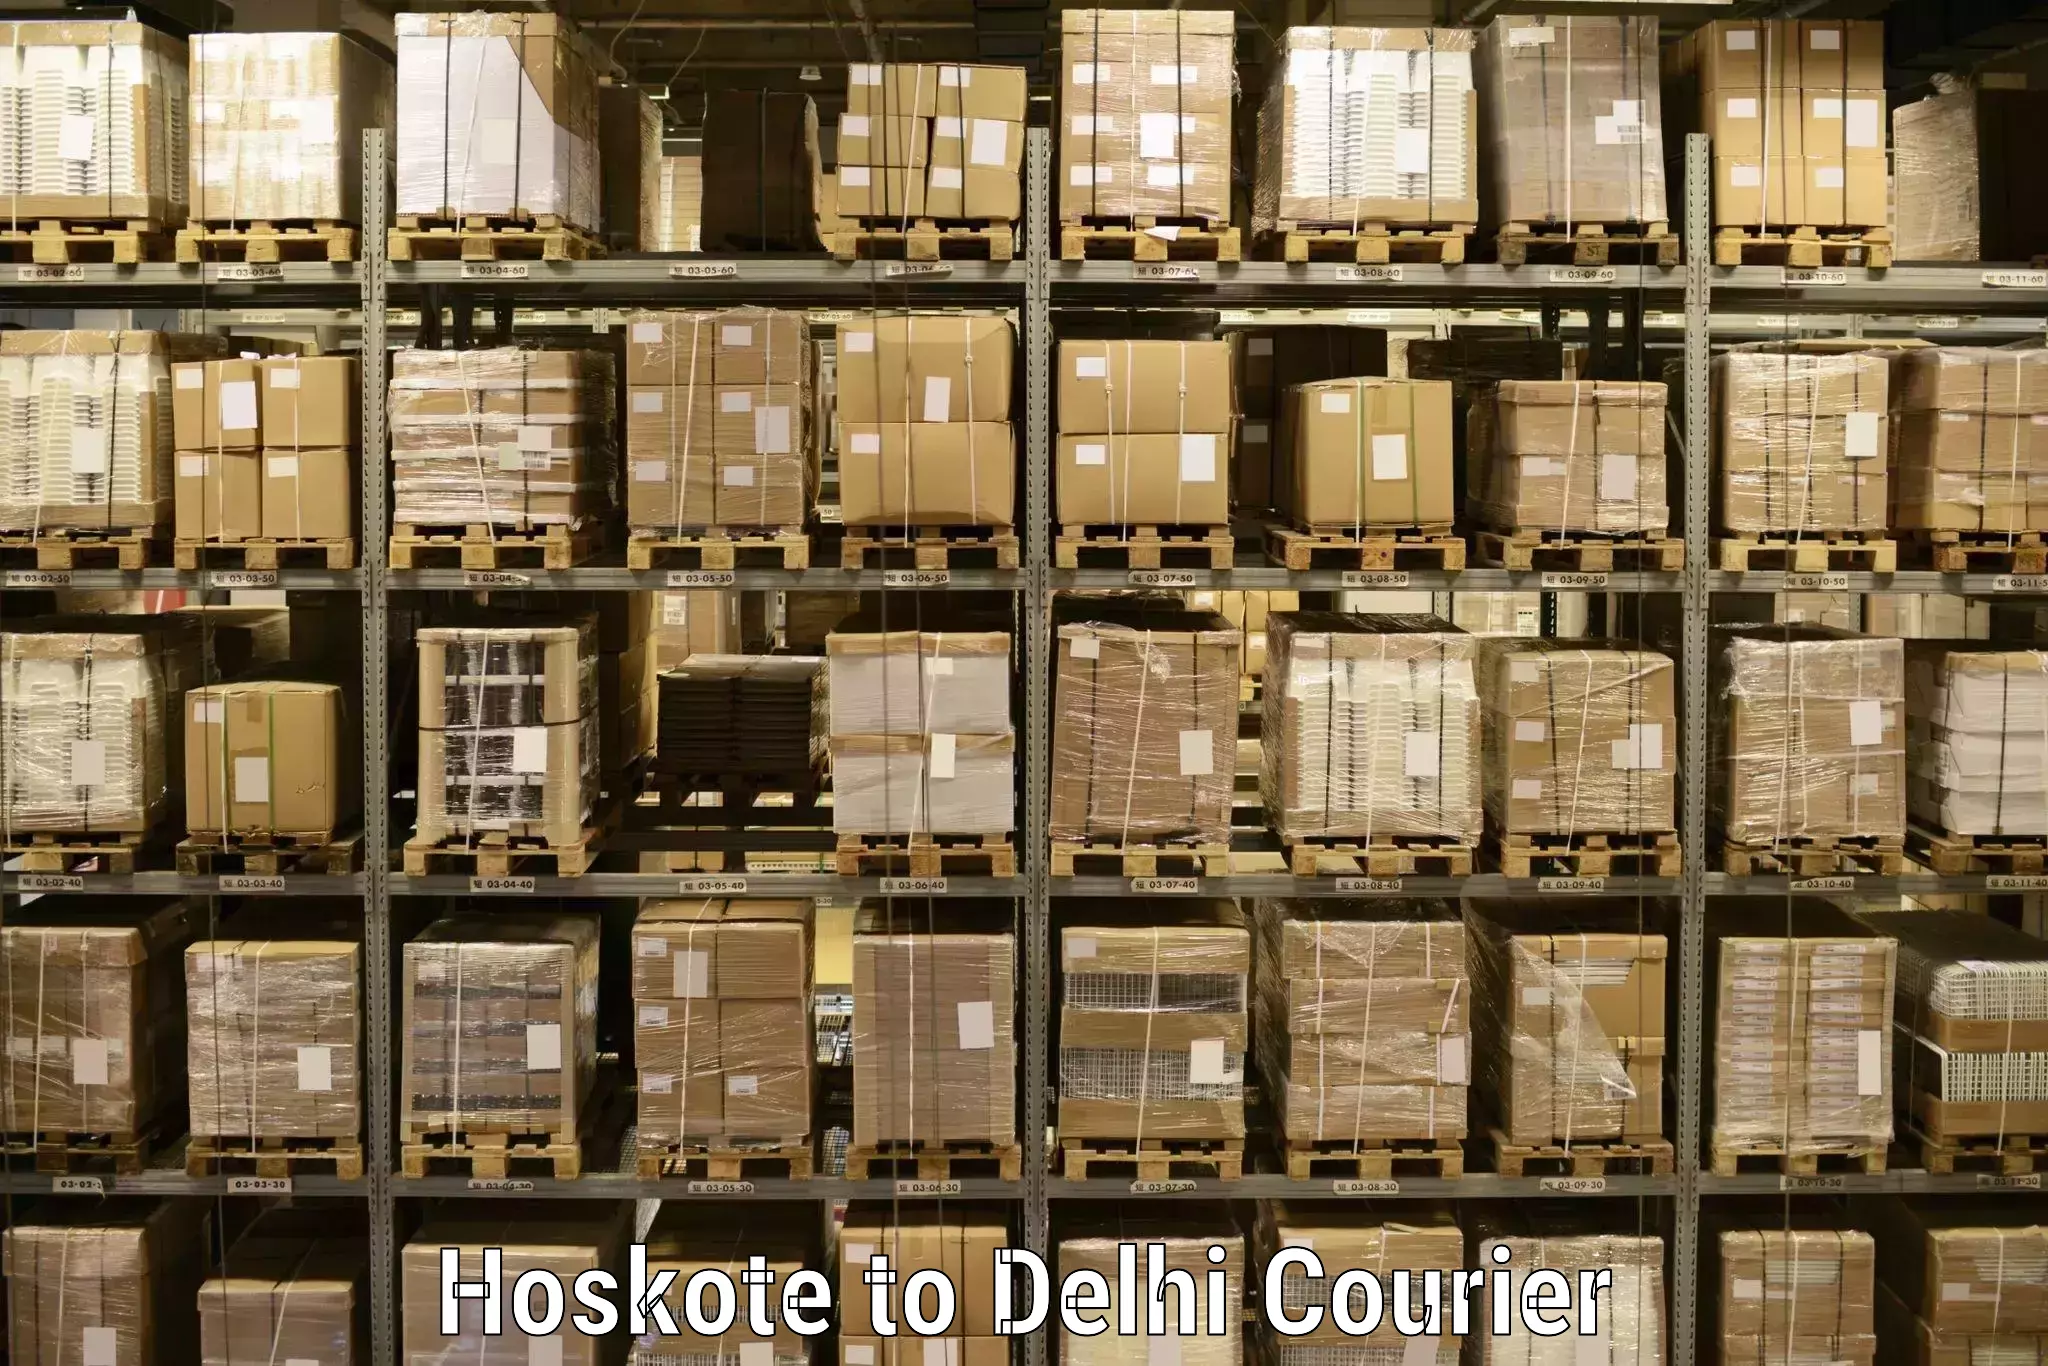 Same day shipping Hoskote to NCR